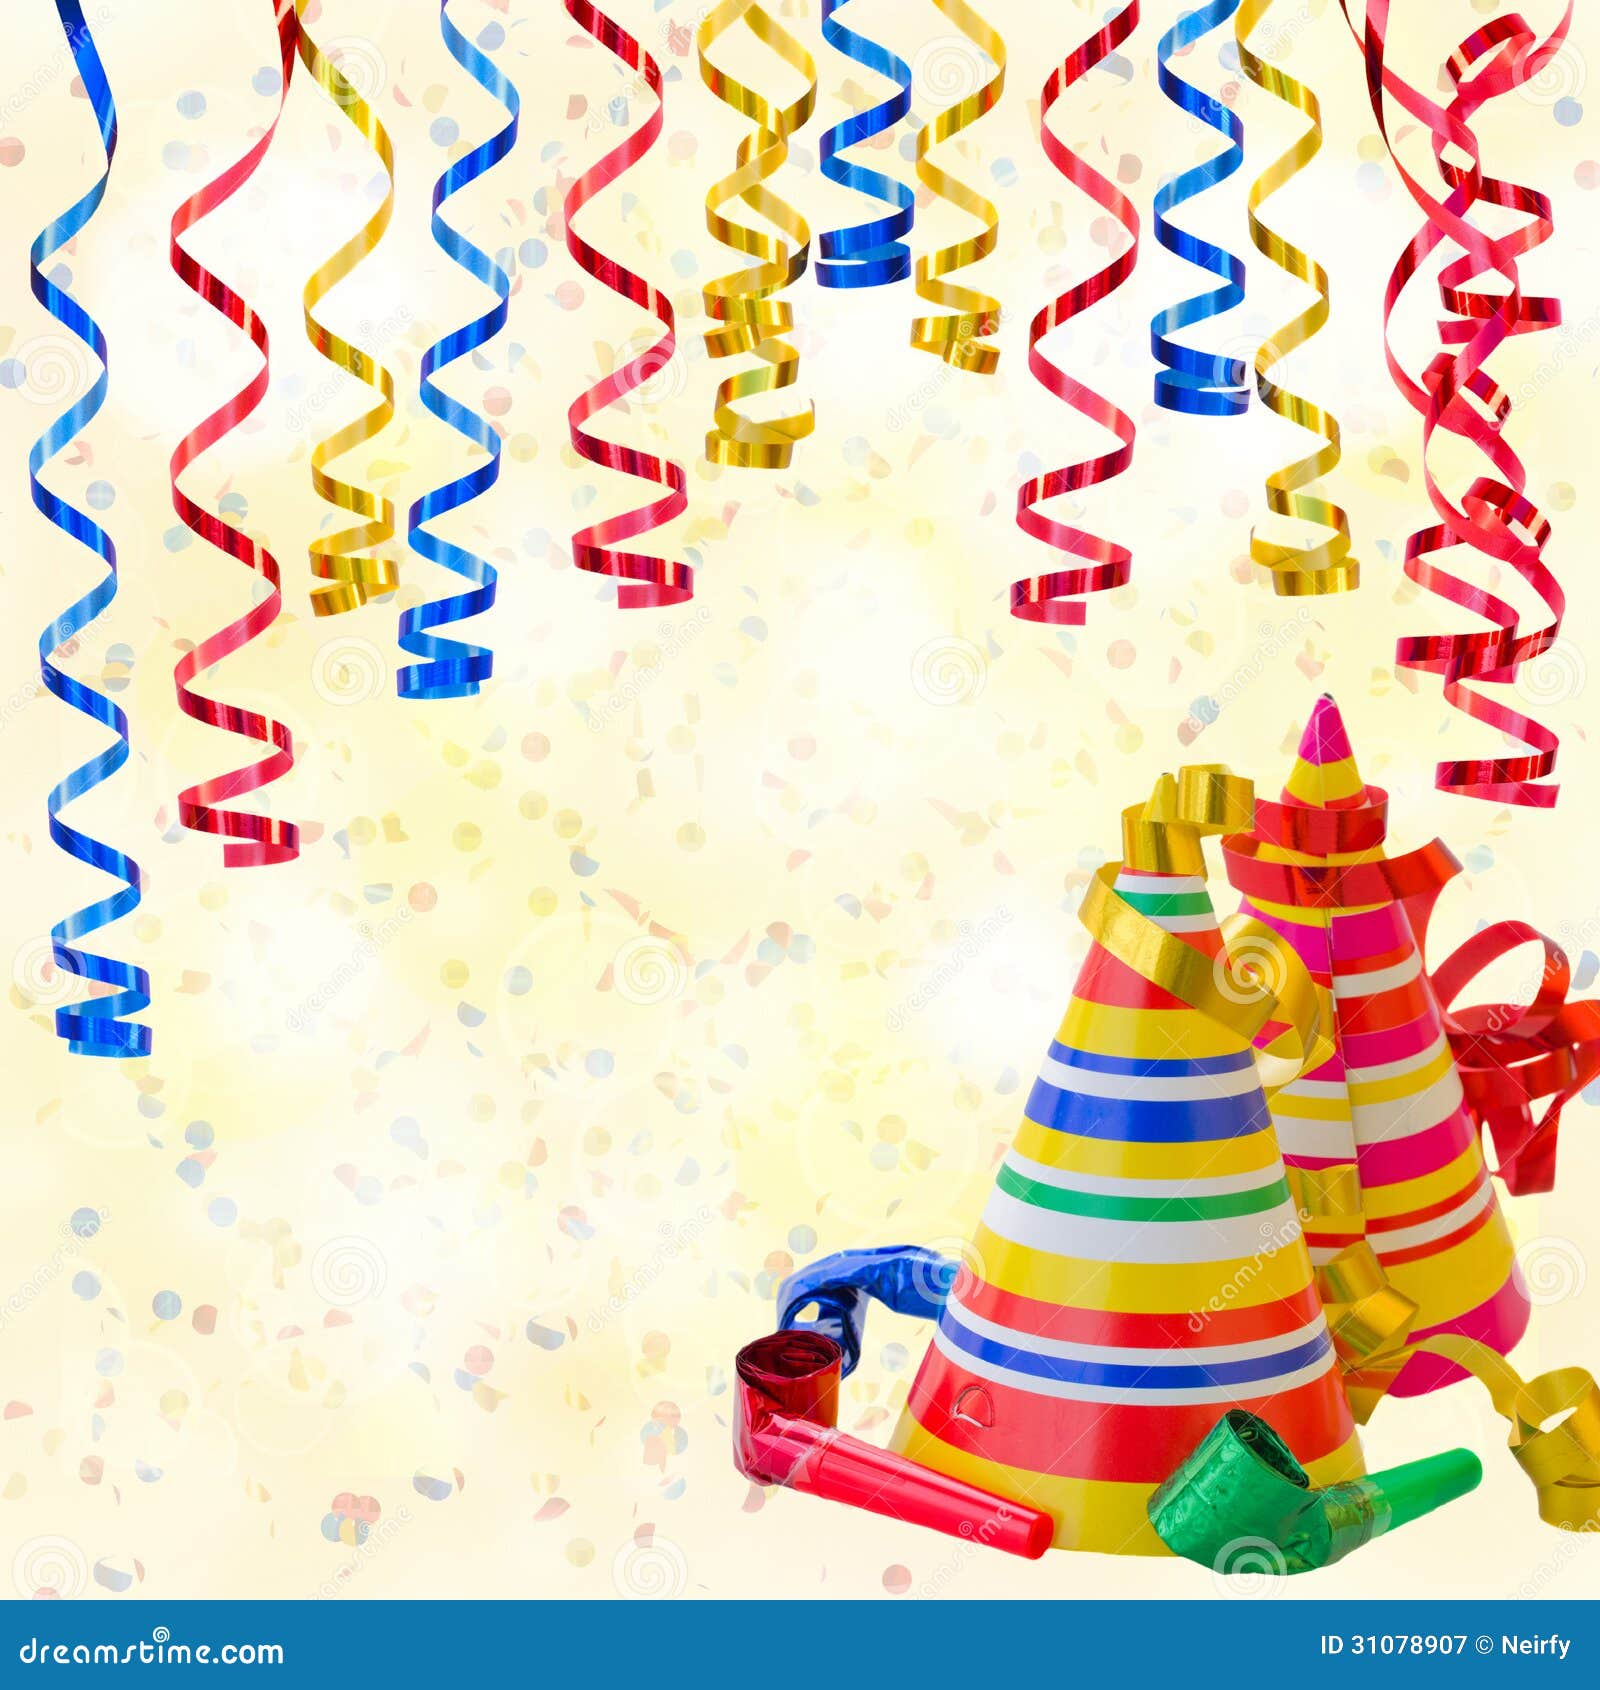 Birthday party background stock image